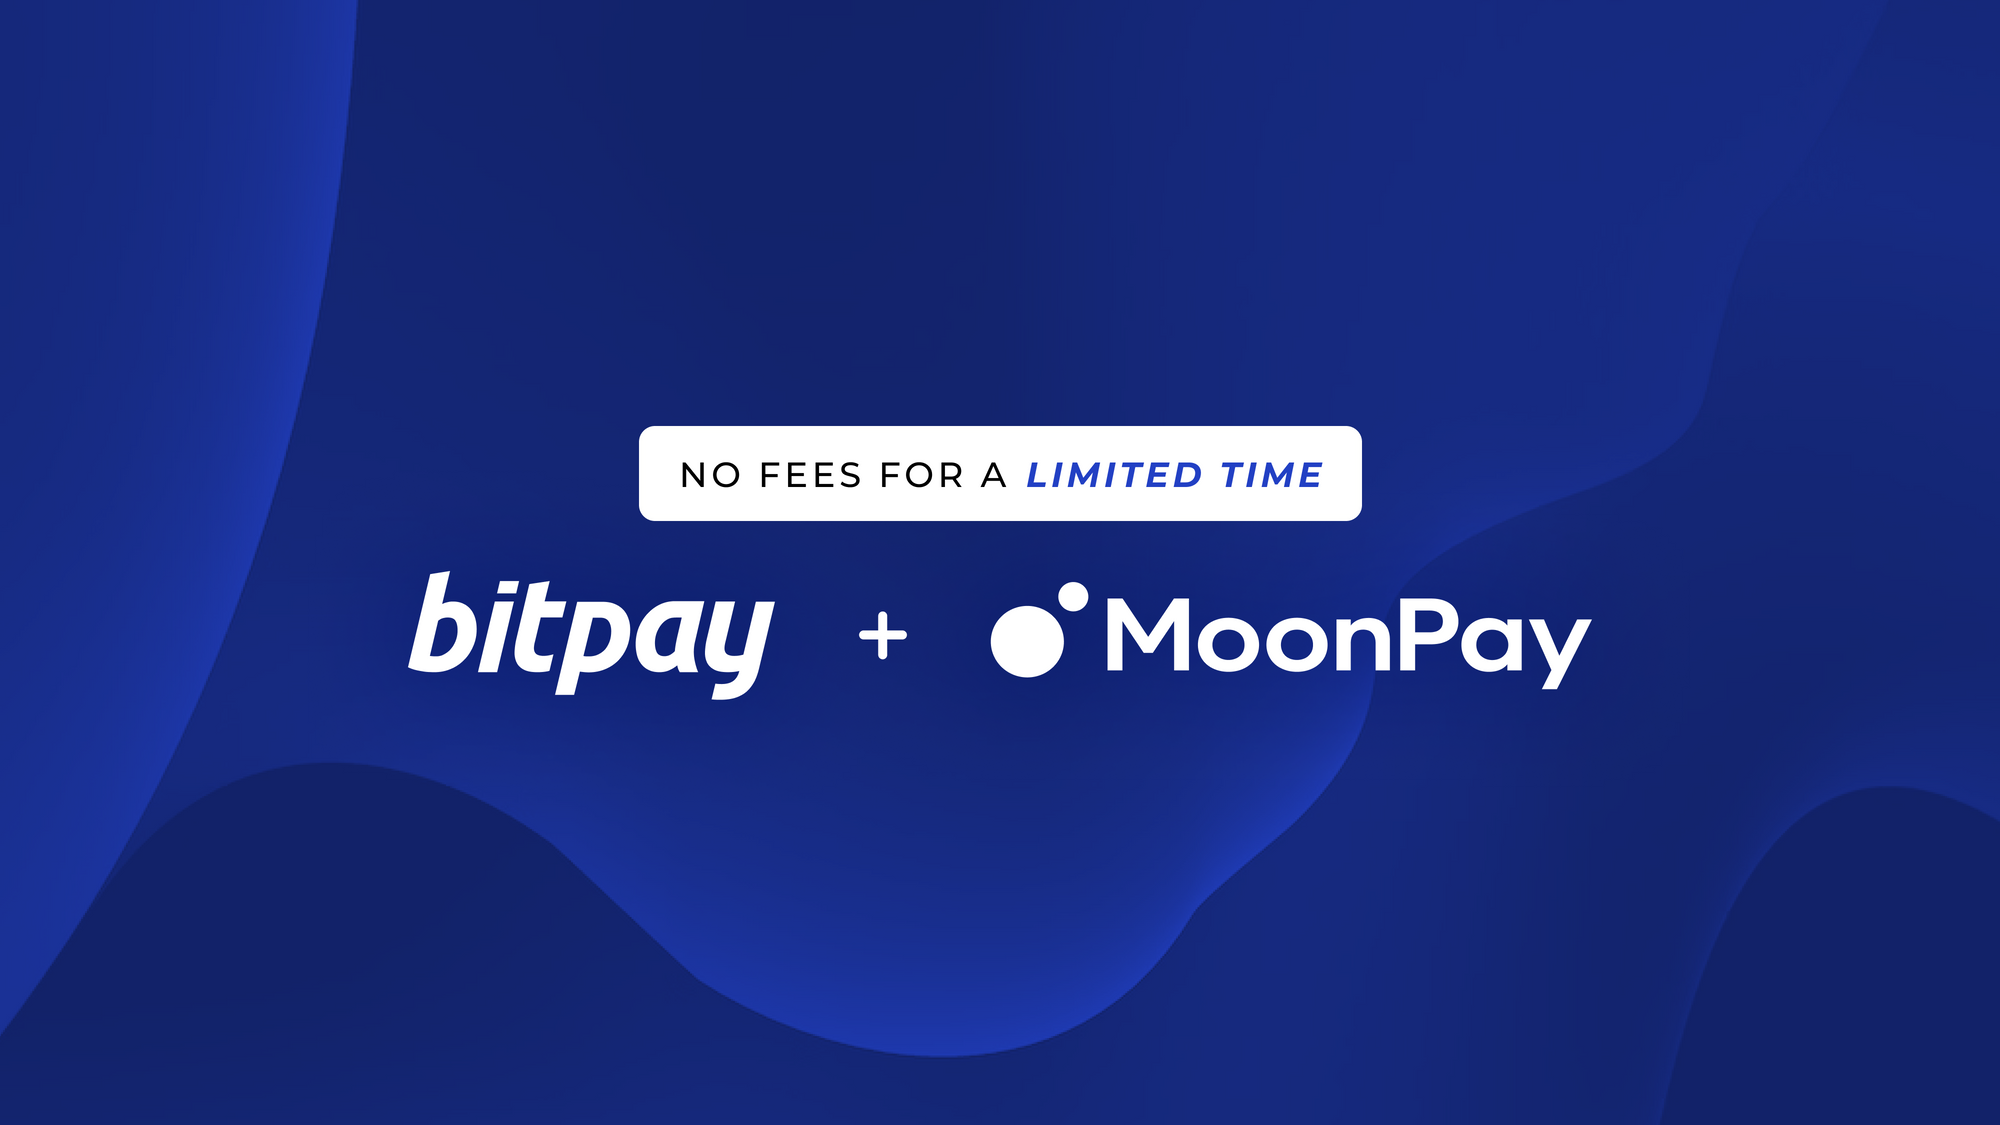 BitPay Partners with MoonPay - Buy Crypto with No Fees for a Limited Time